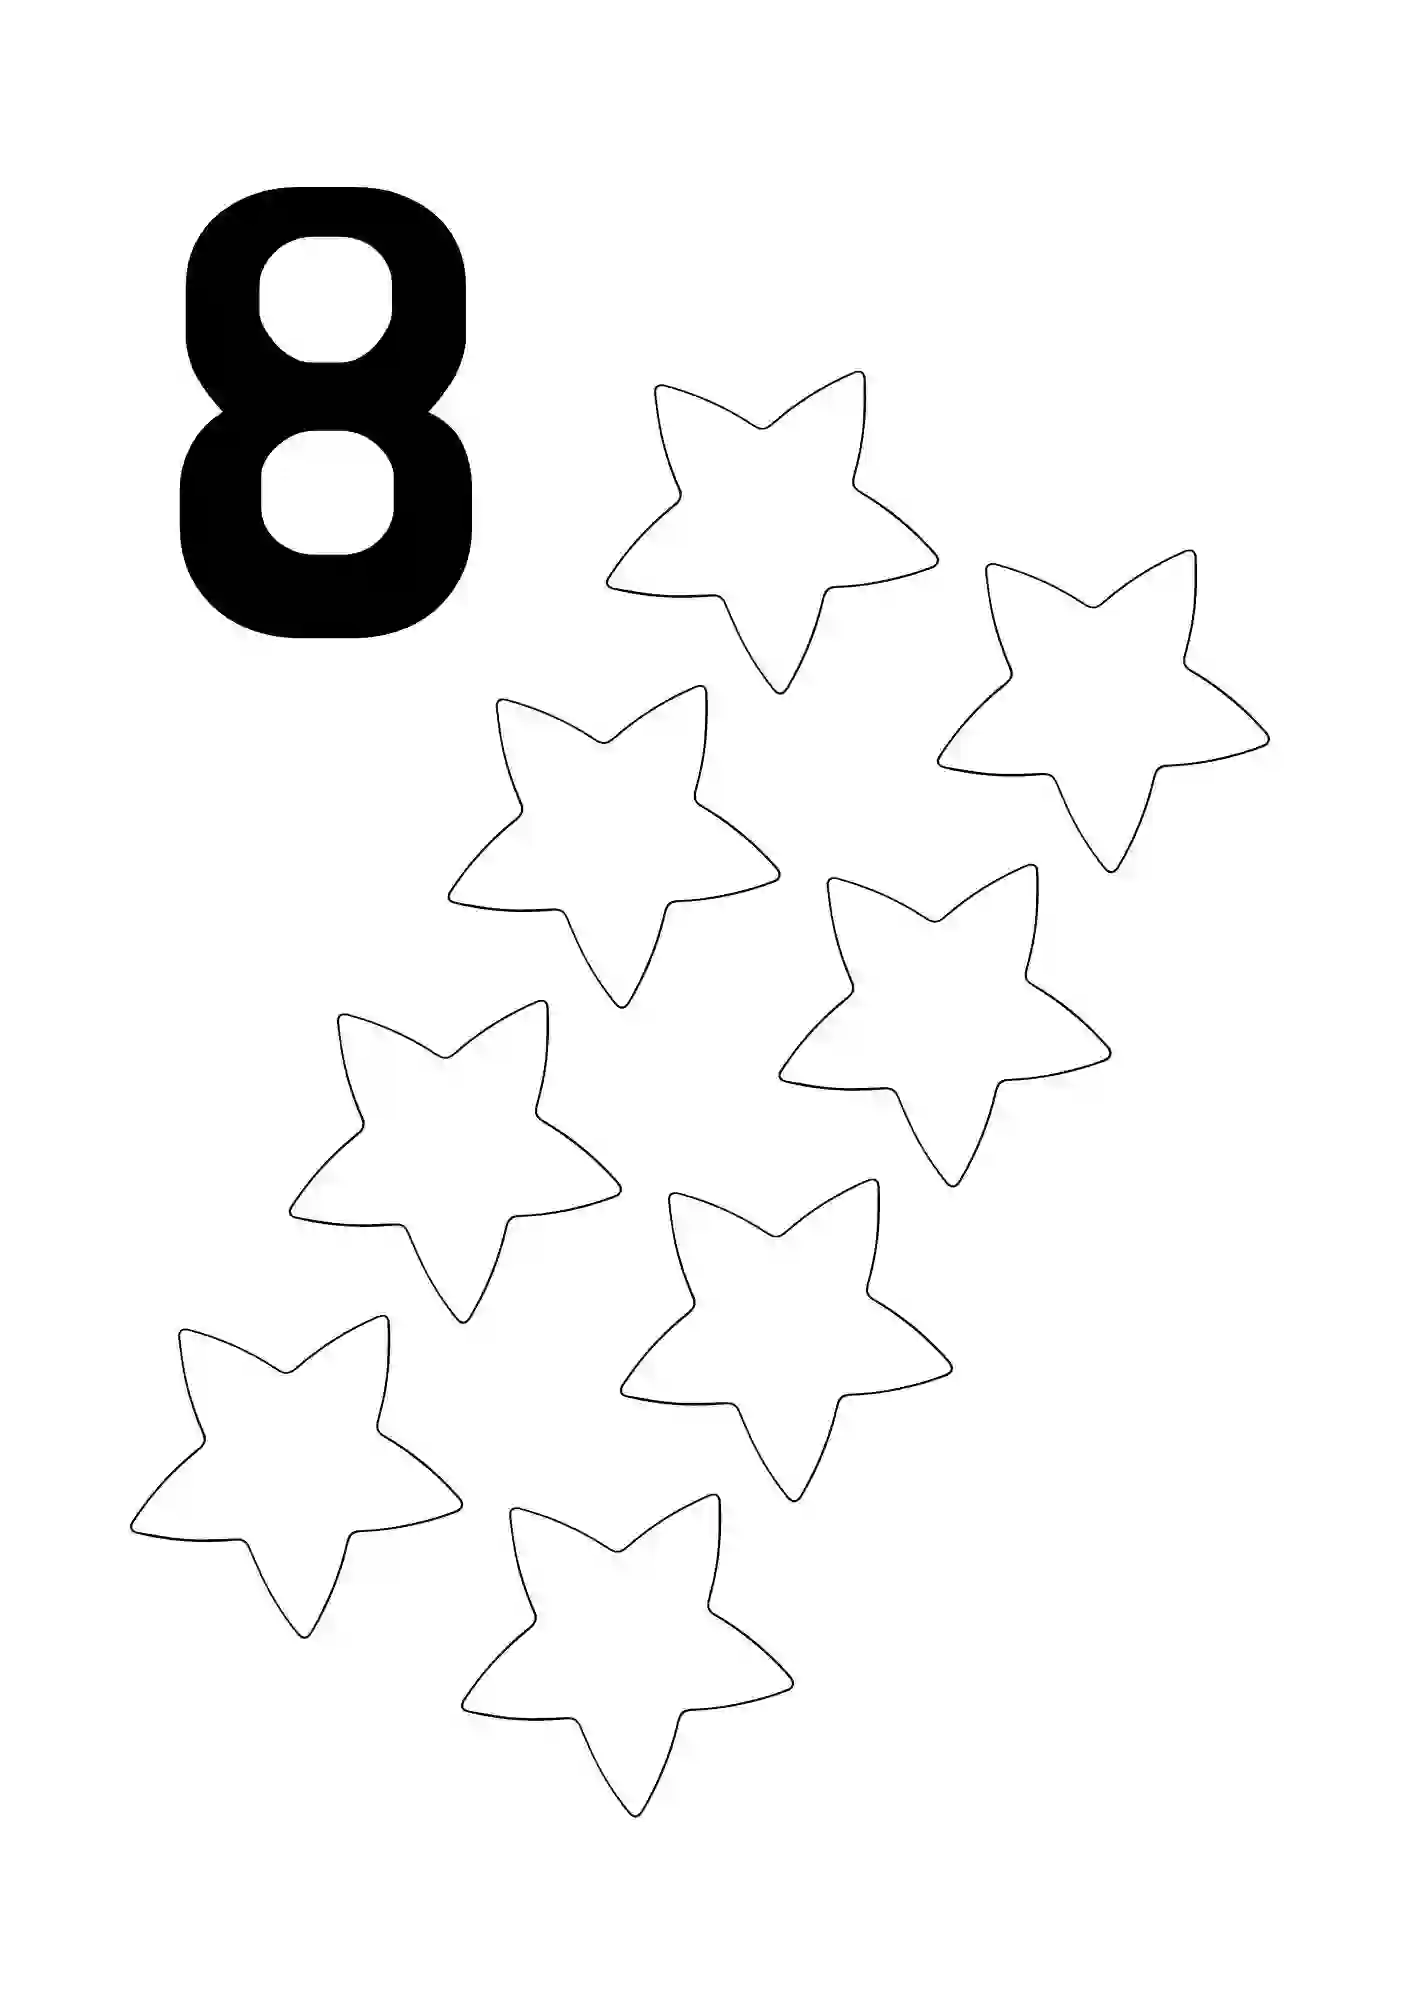 Count And Color Worksheets 1-10 (NUMBER 8)